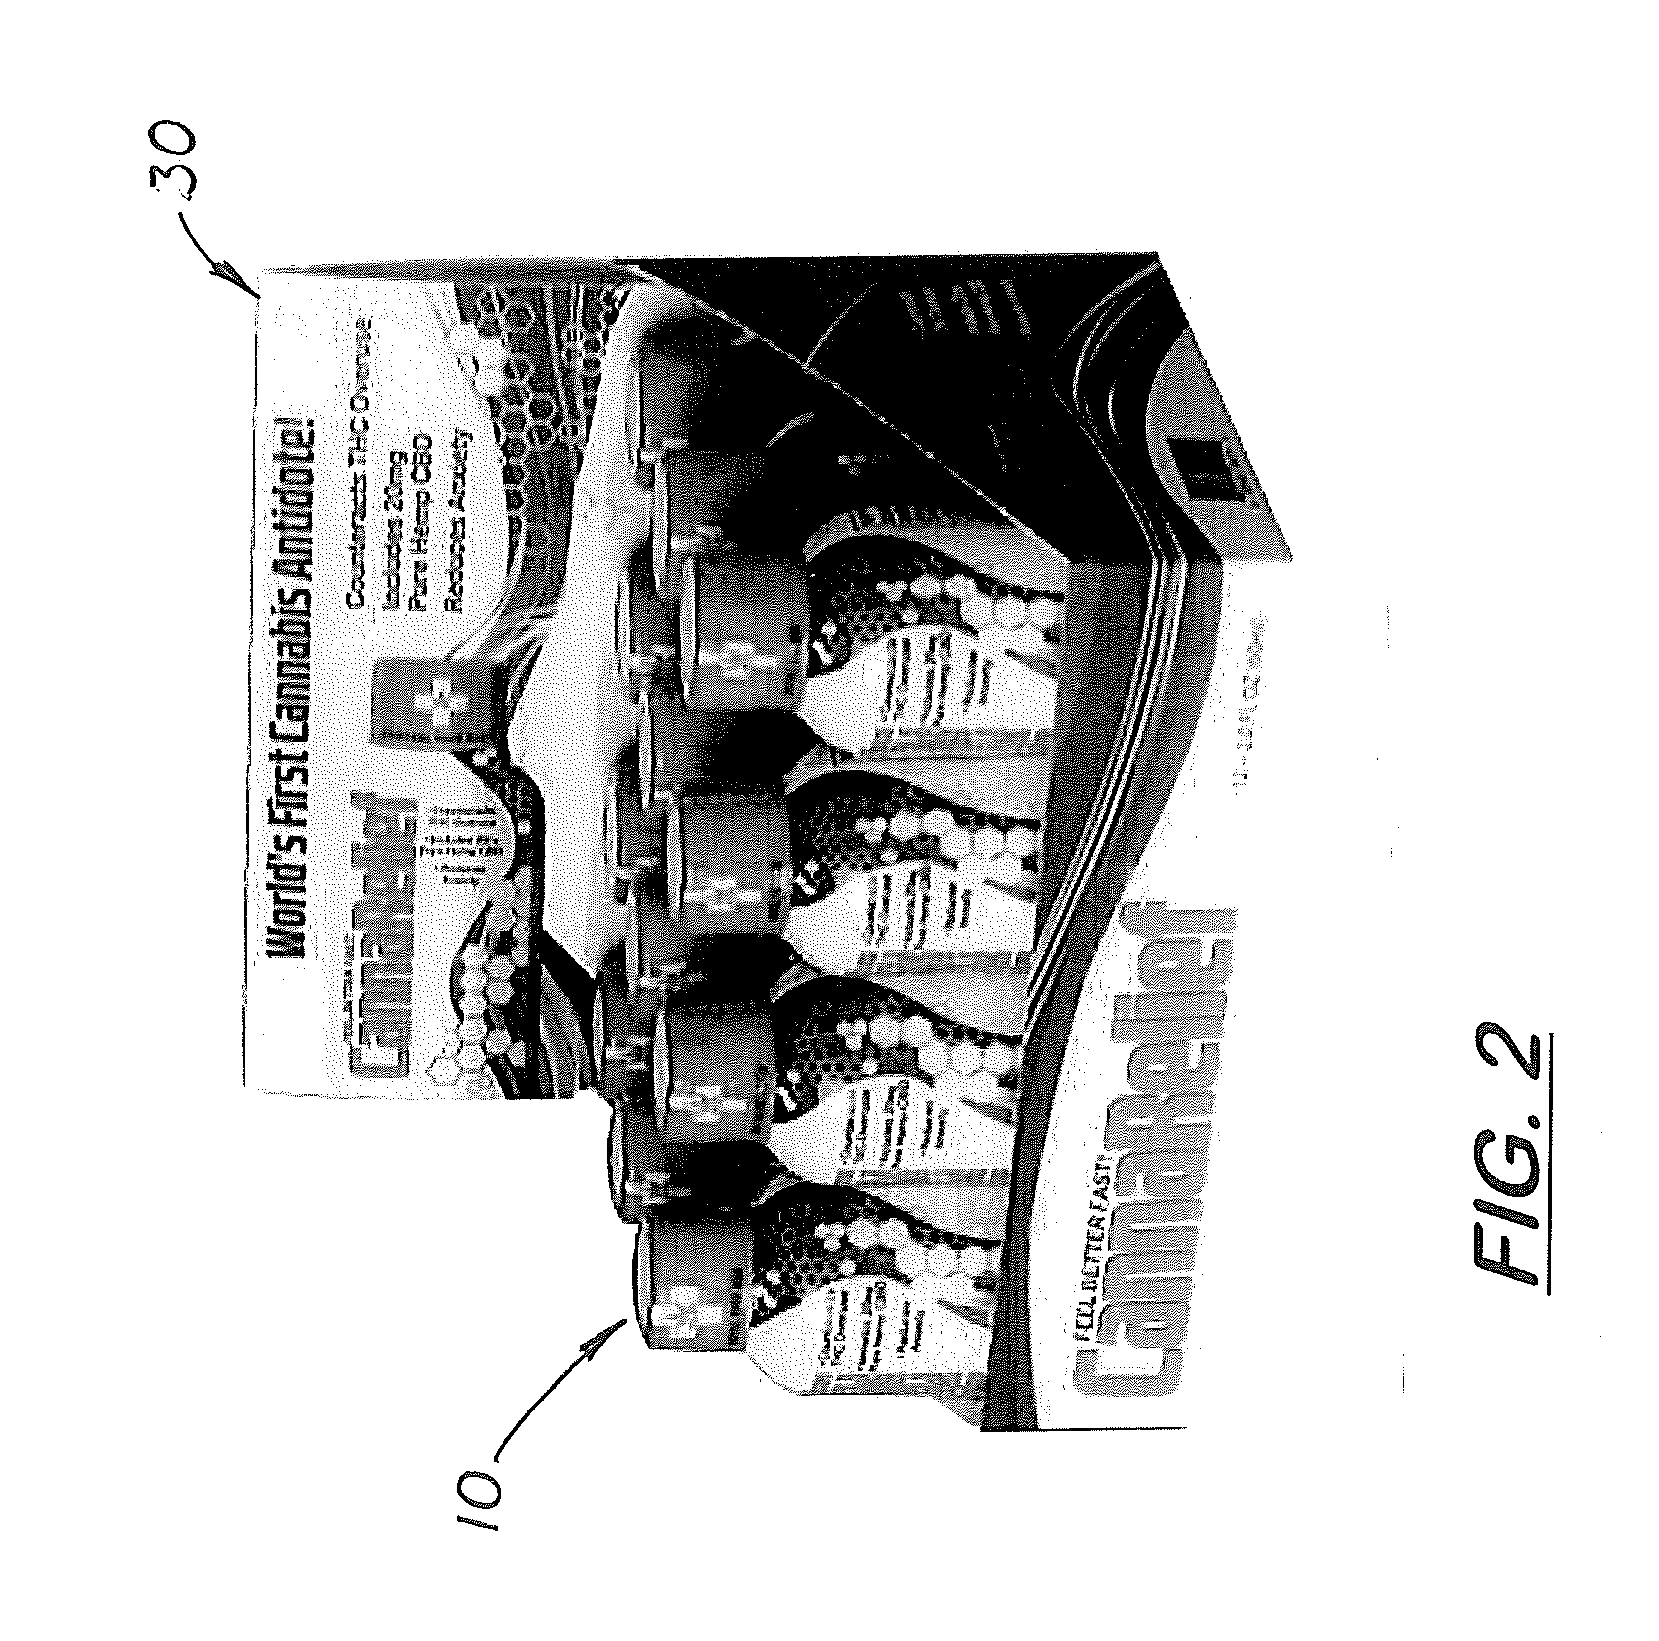 Composition, Commericial Product and Method for Treating Cannabis Toxicity